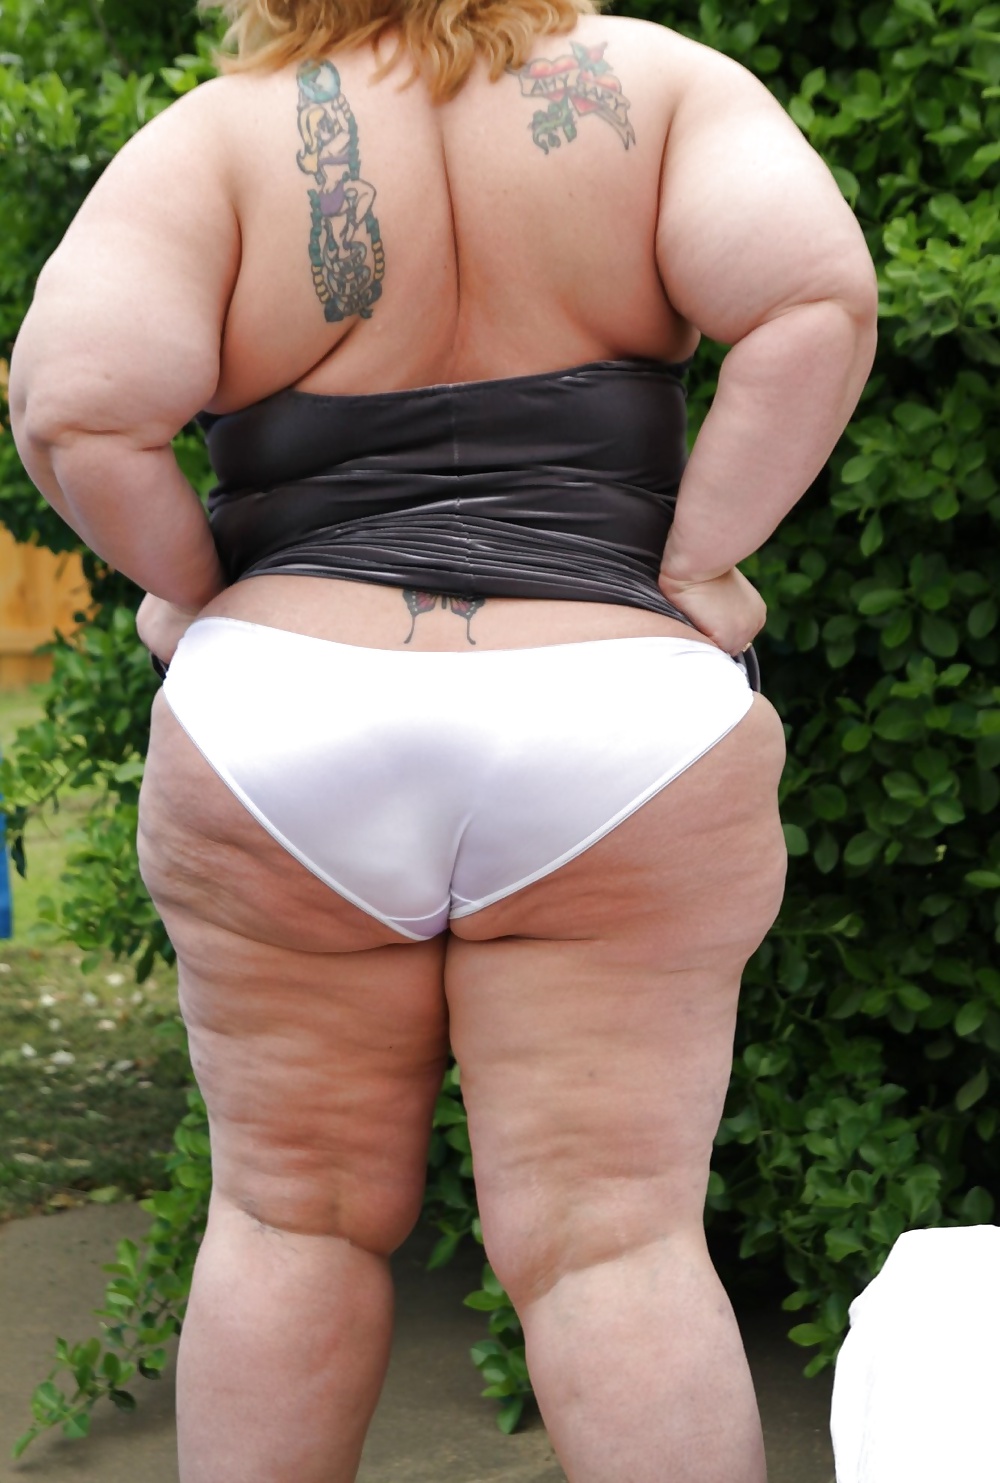 BBW EXTRA LARGE ASS II porn pictures